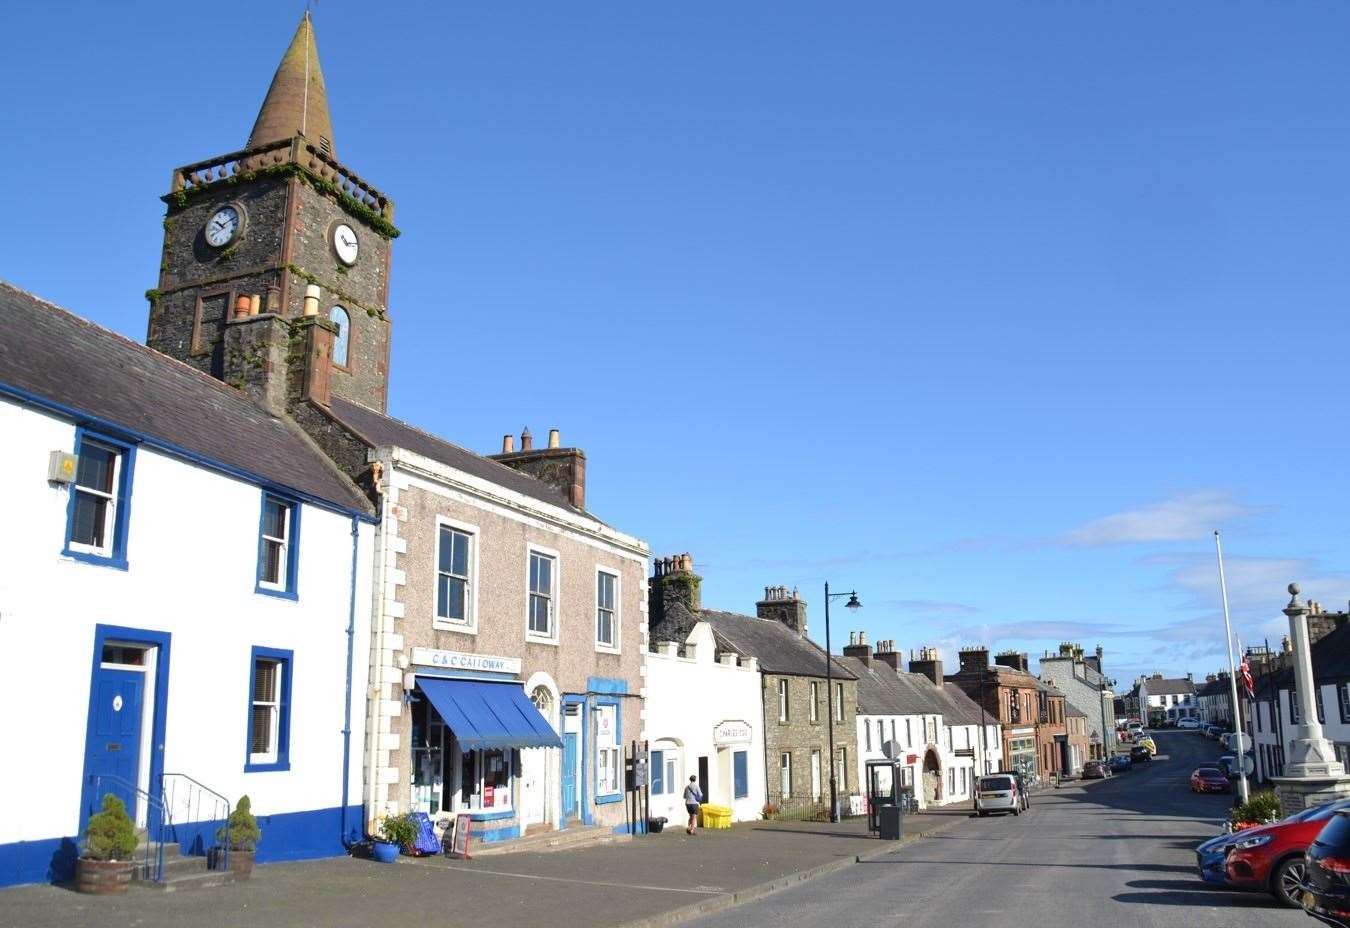 Whithorn town centre.